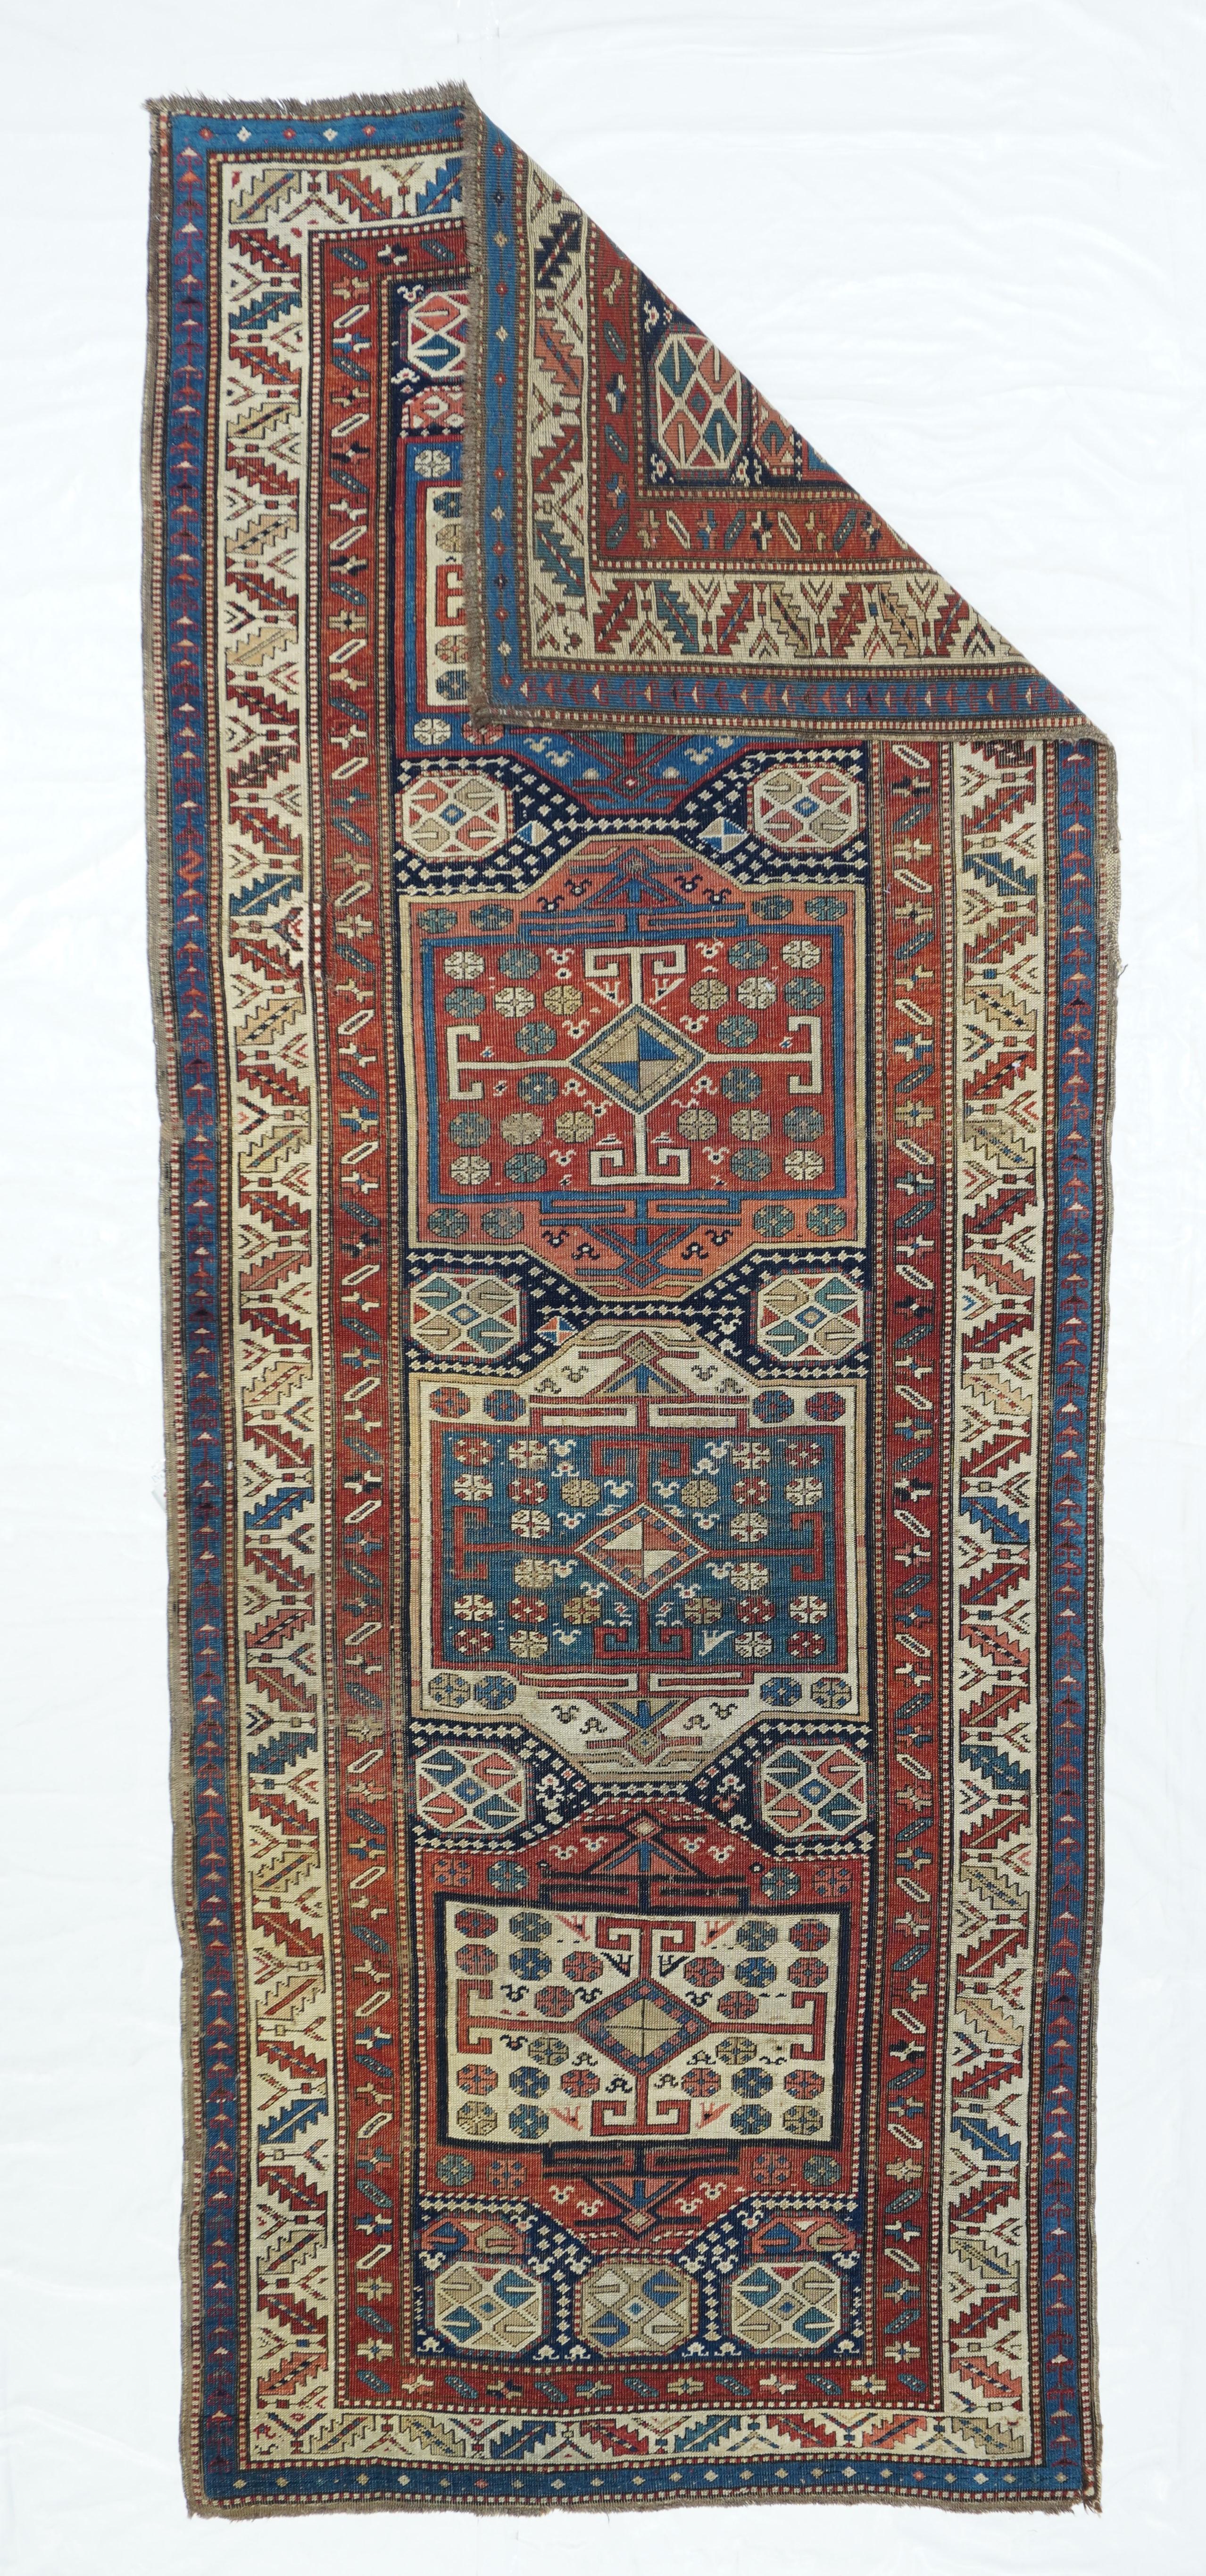 The navy field of this all wool construction, leathery handle, east Caucasian long rug (kellegi) hosts four squarish cartouches in red, ivory, dark blue- green and burnt salmon. Lozenges with long arms decorate each panel’s centre. Smaller octagons